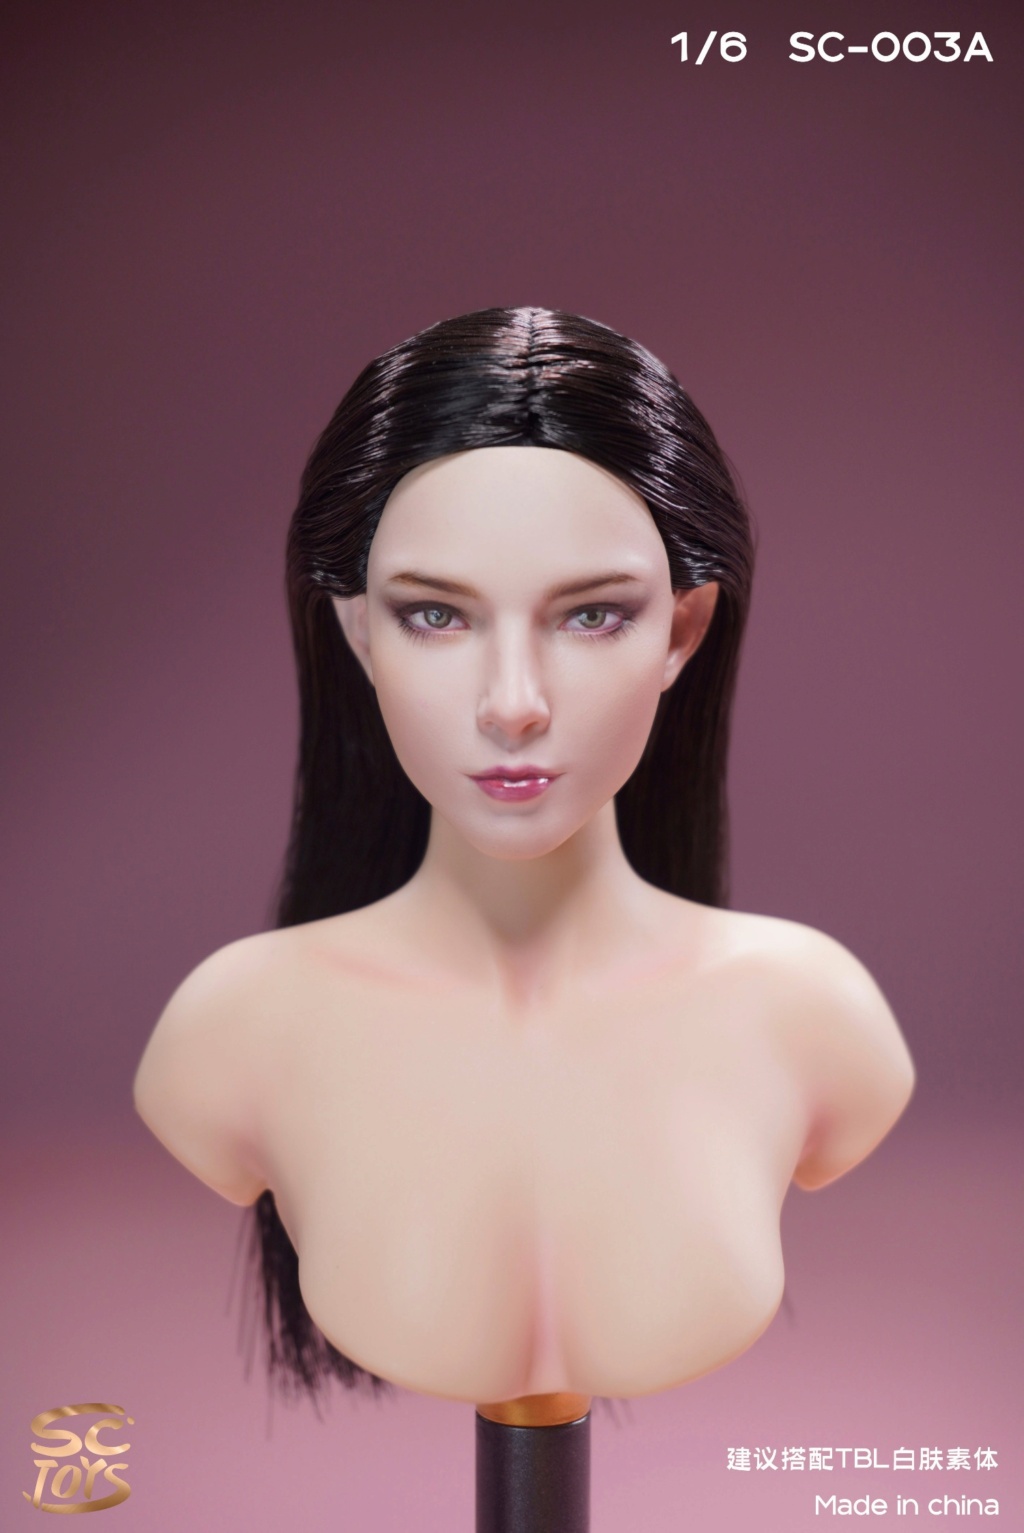 SCToys - NEW PRODUCT: SCToys: 1/6 European and American head sculpture - LaLi - three hairstyles #SC003A/B/C 20570210